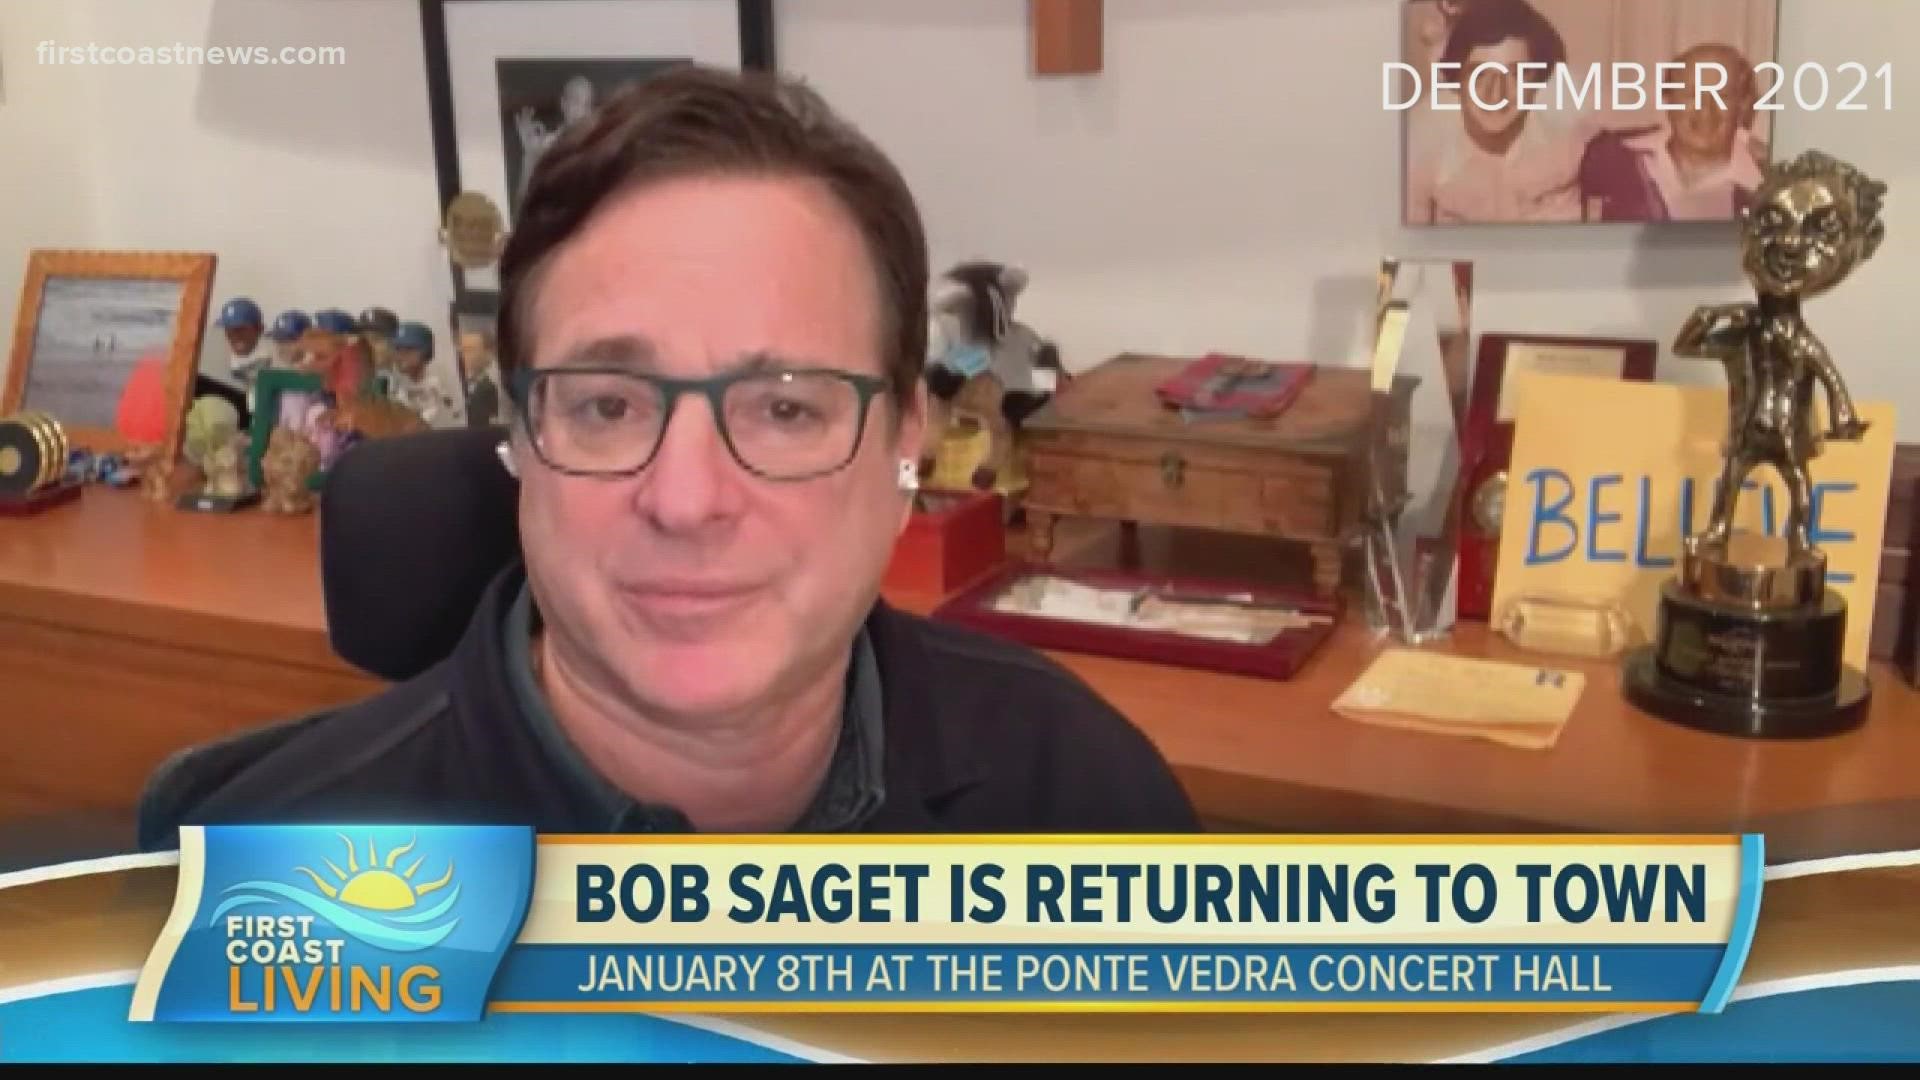 "I'm just wanting to make people feel good," Saget told us ahead of his Ponte Vedra performance. "I'm tired of the yelling. I just want to make people laugh."